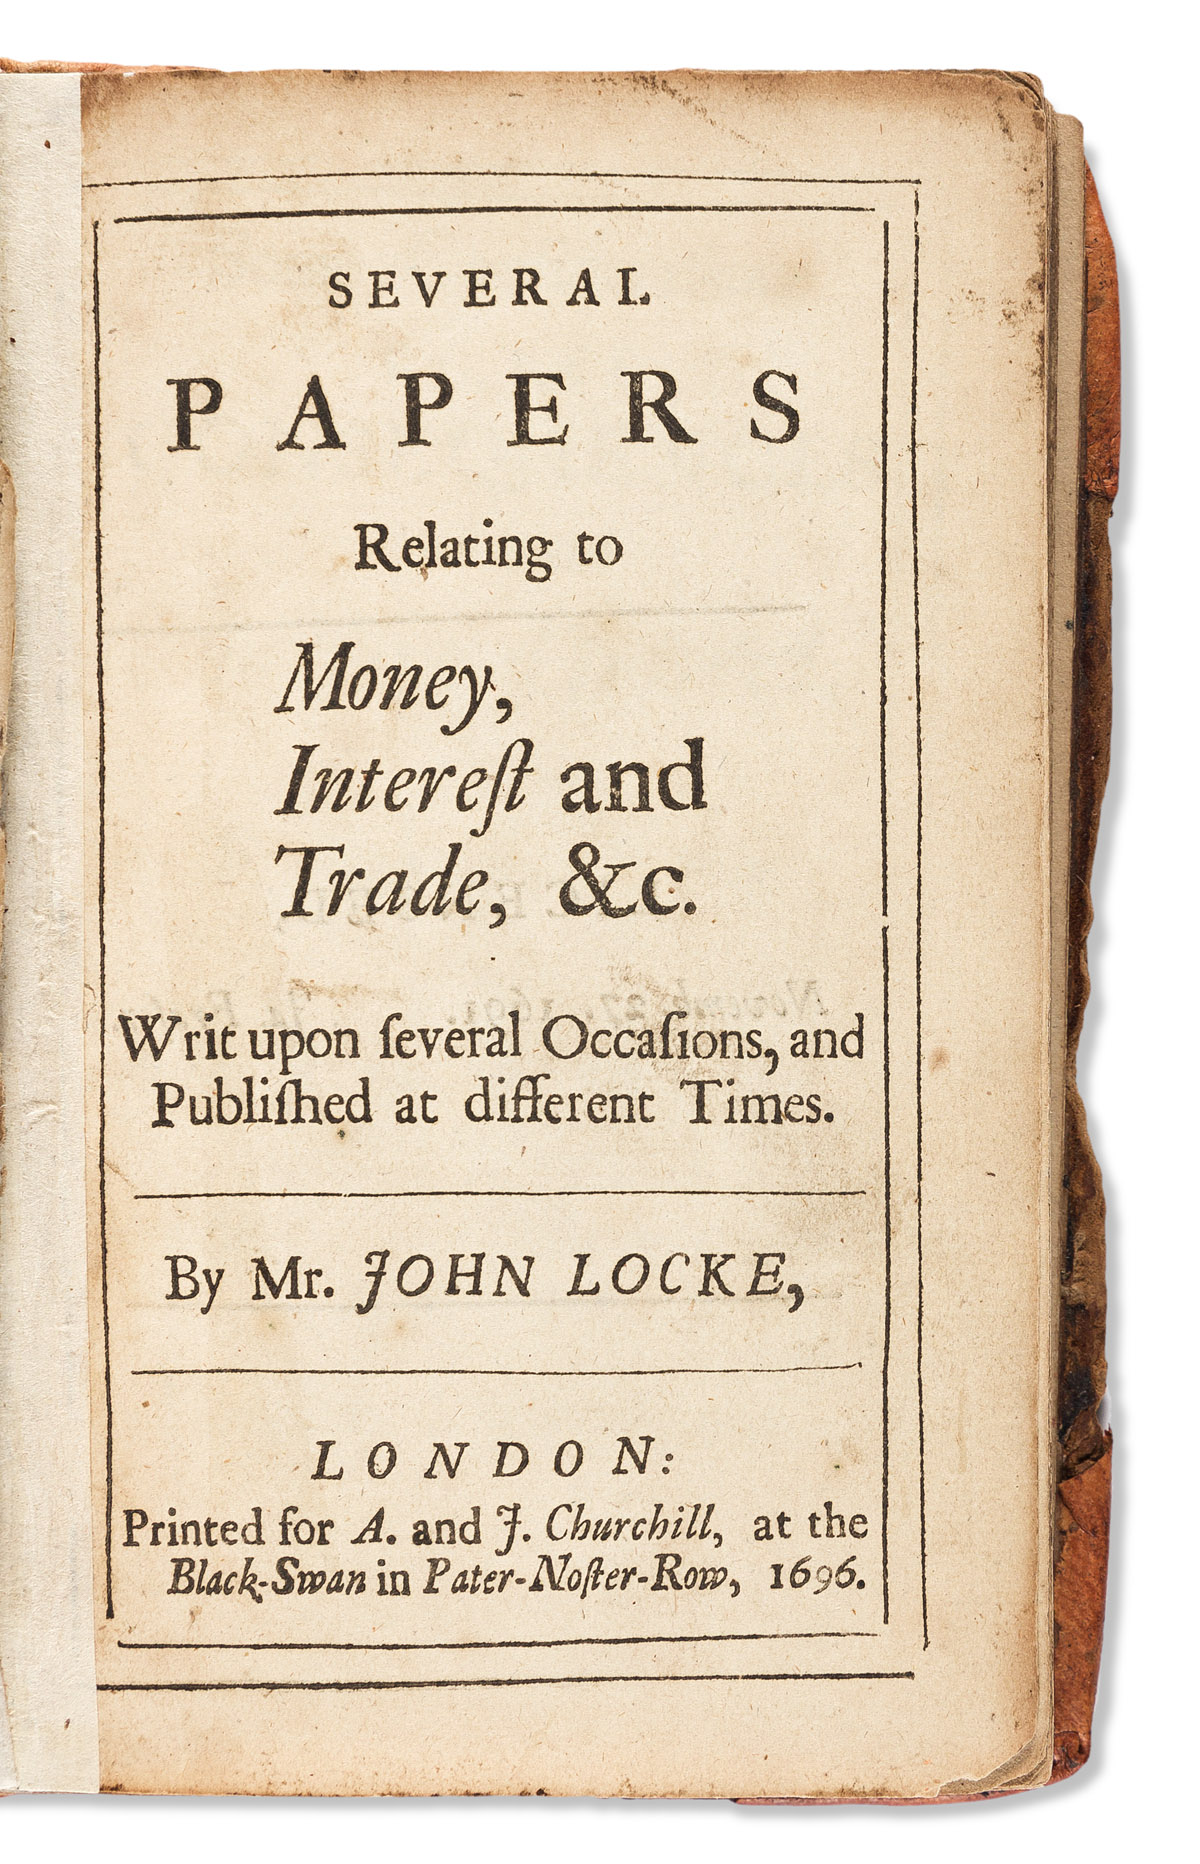 [Economics] Locke, John (1632-1704) Several Papers Relating to Money, Interest, and Trade, &c.